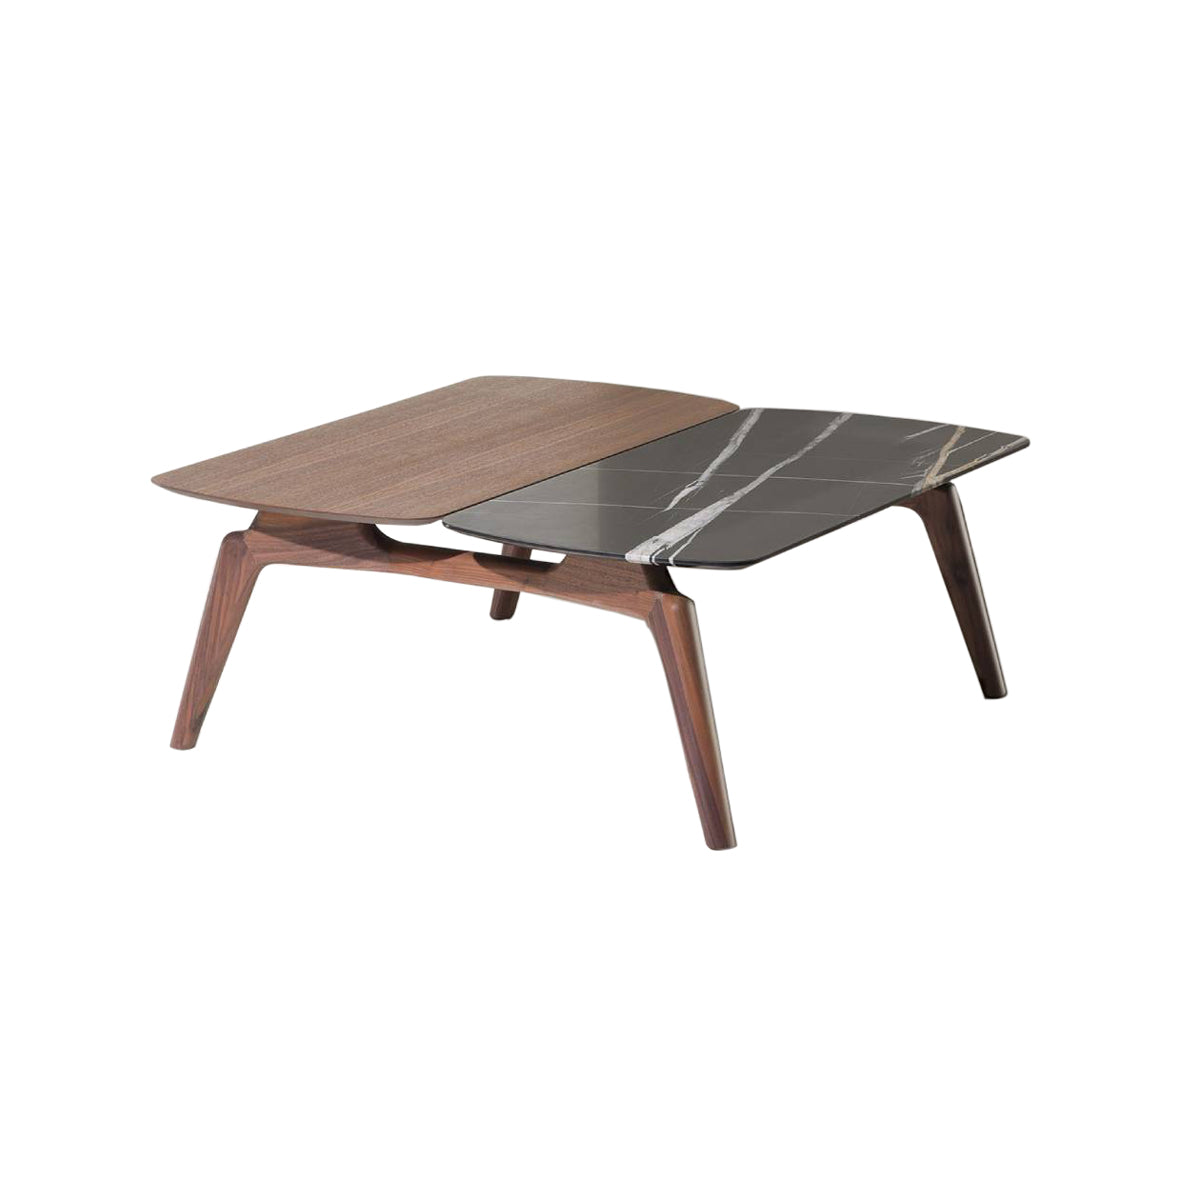 Mixta Duo Coffee Table: Small - 23.6